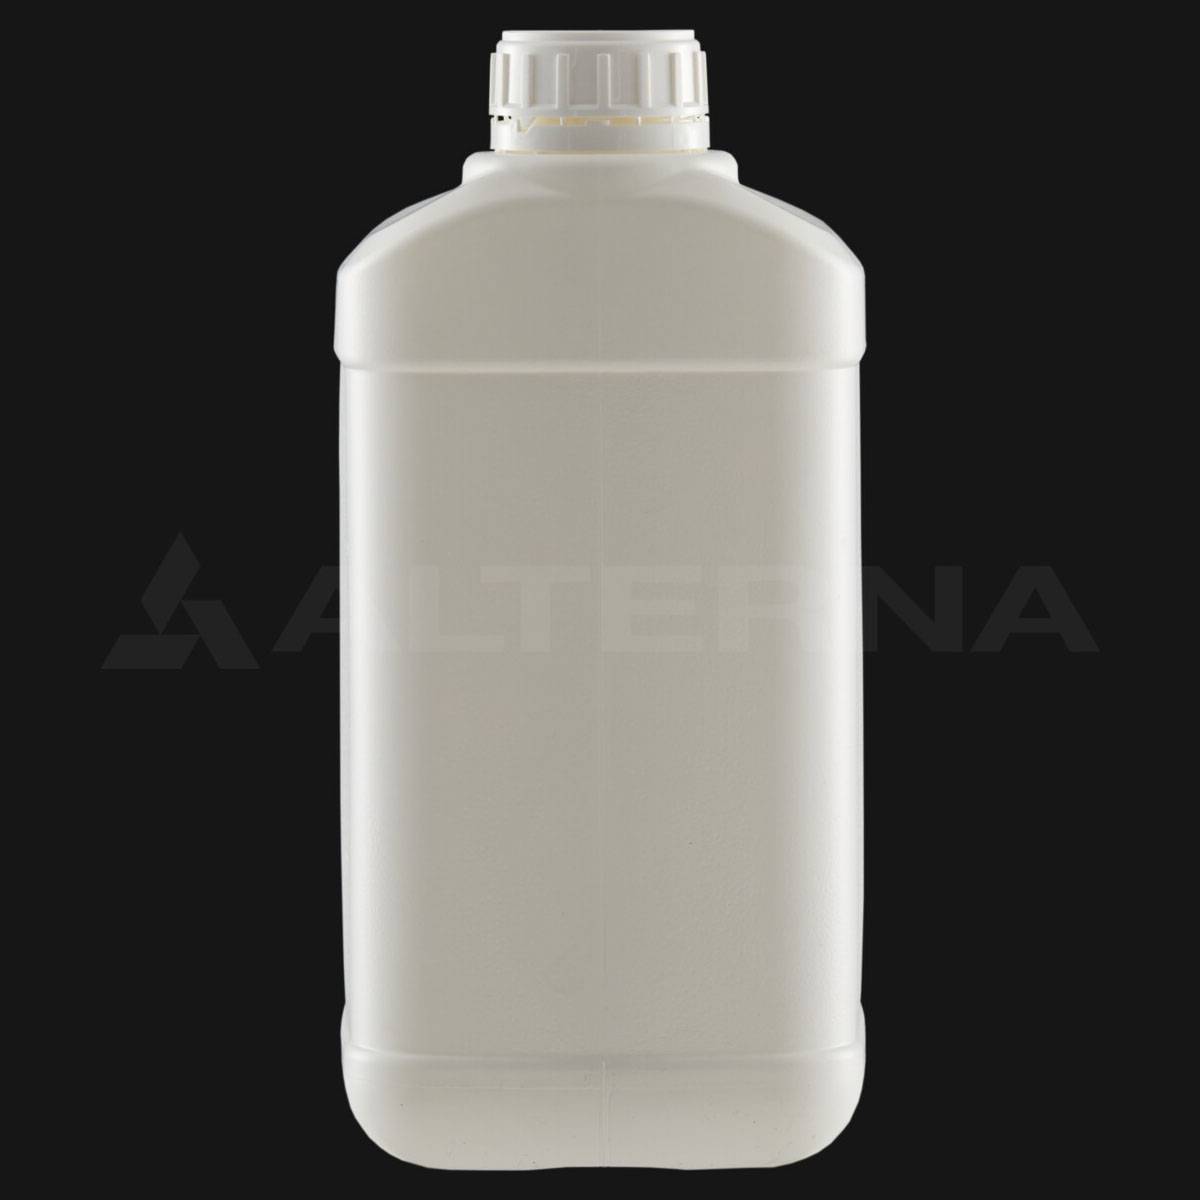 https://d28ehrx95xozcp.cloudfront.net/filters:quality(70)/fit-in/1200x1200/alterna/plasware-5-Liter-HDPE-Jerry-Can-with-50-mm-Secure-Cap-J5004D-2-HbmJ.jpg